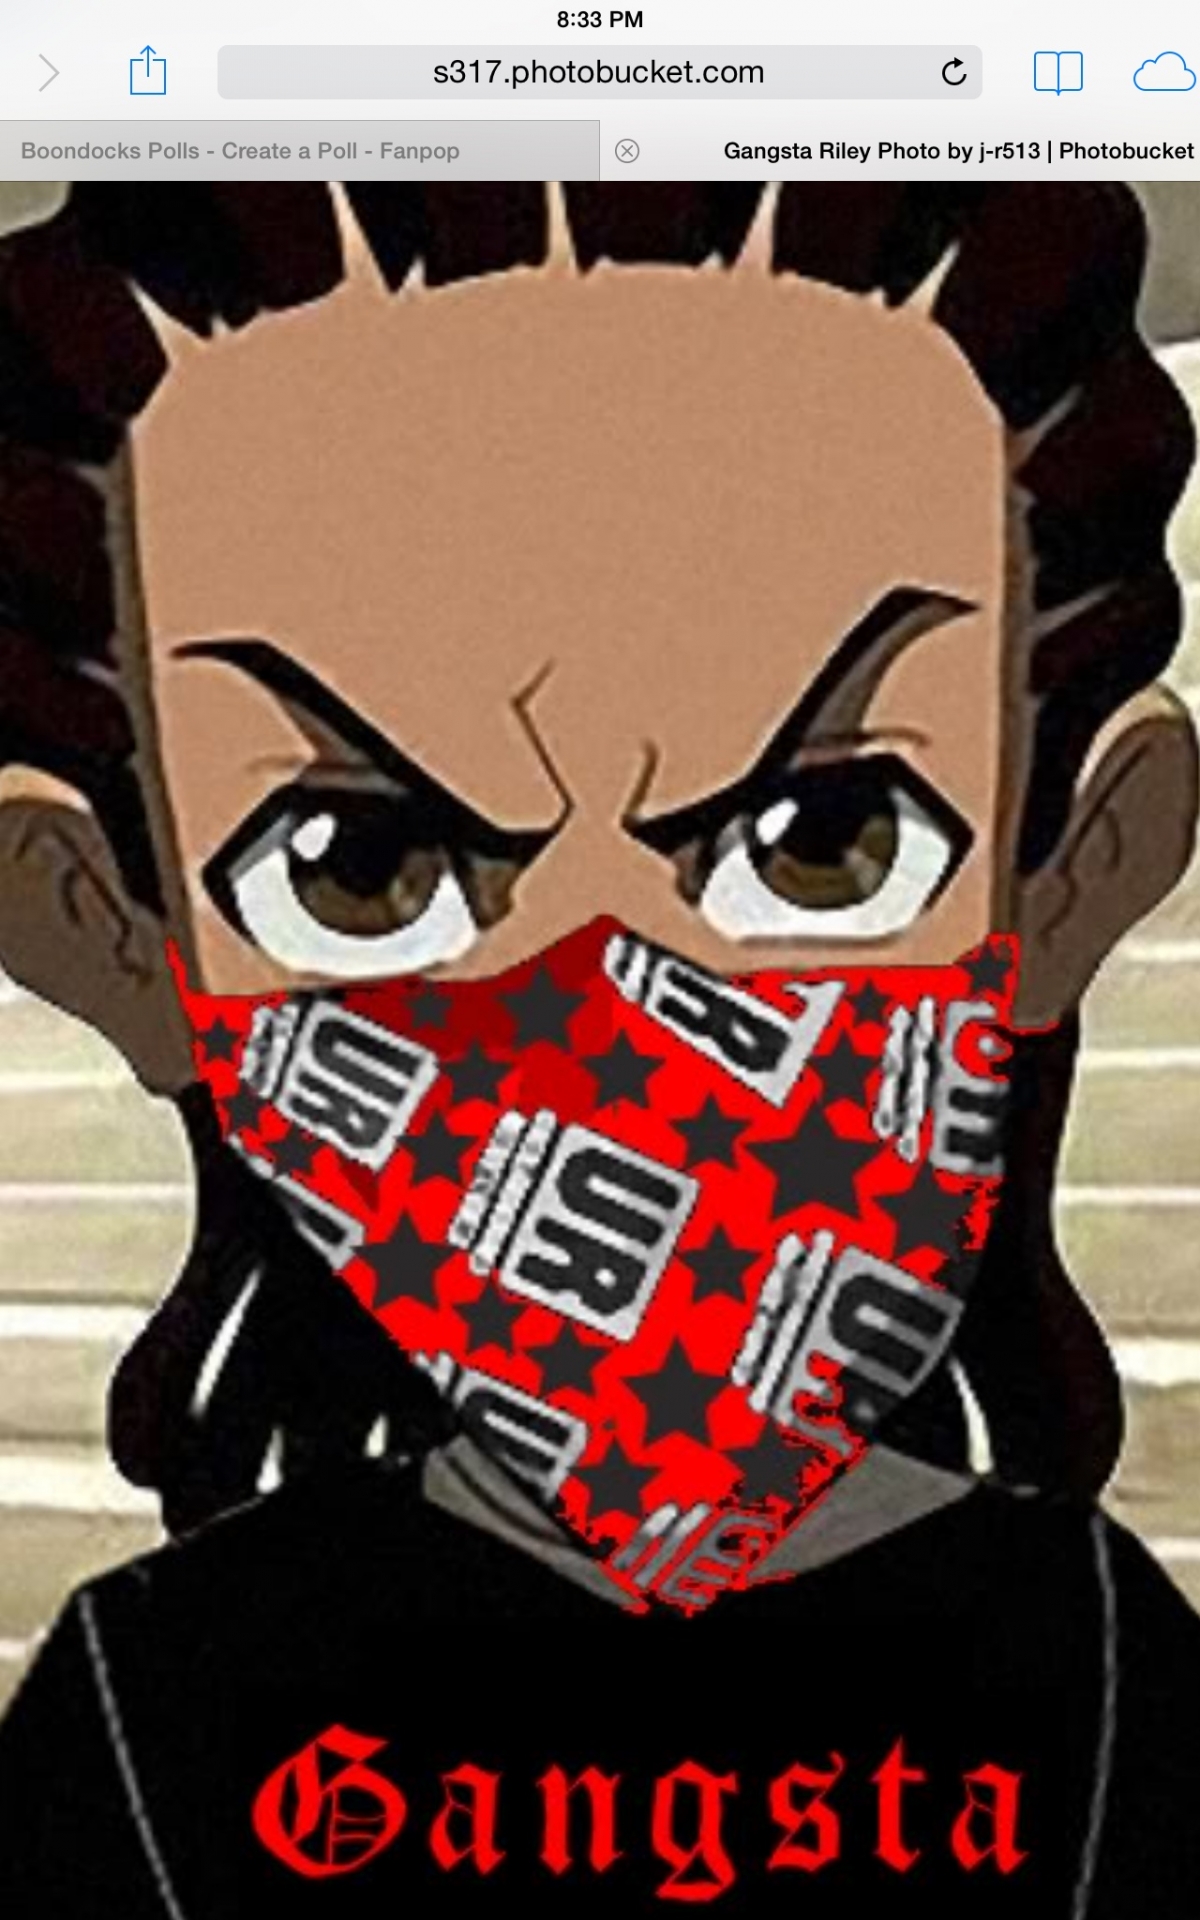 The Boondocks Images Boondocks Riley My Boo Hd - Gangsta Riley From The Boondocks , HD Wallpaper & Backgrounds